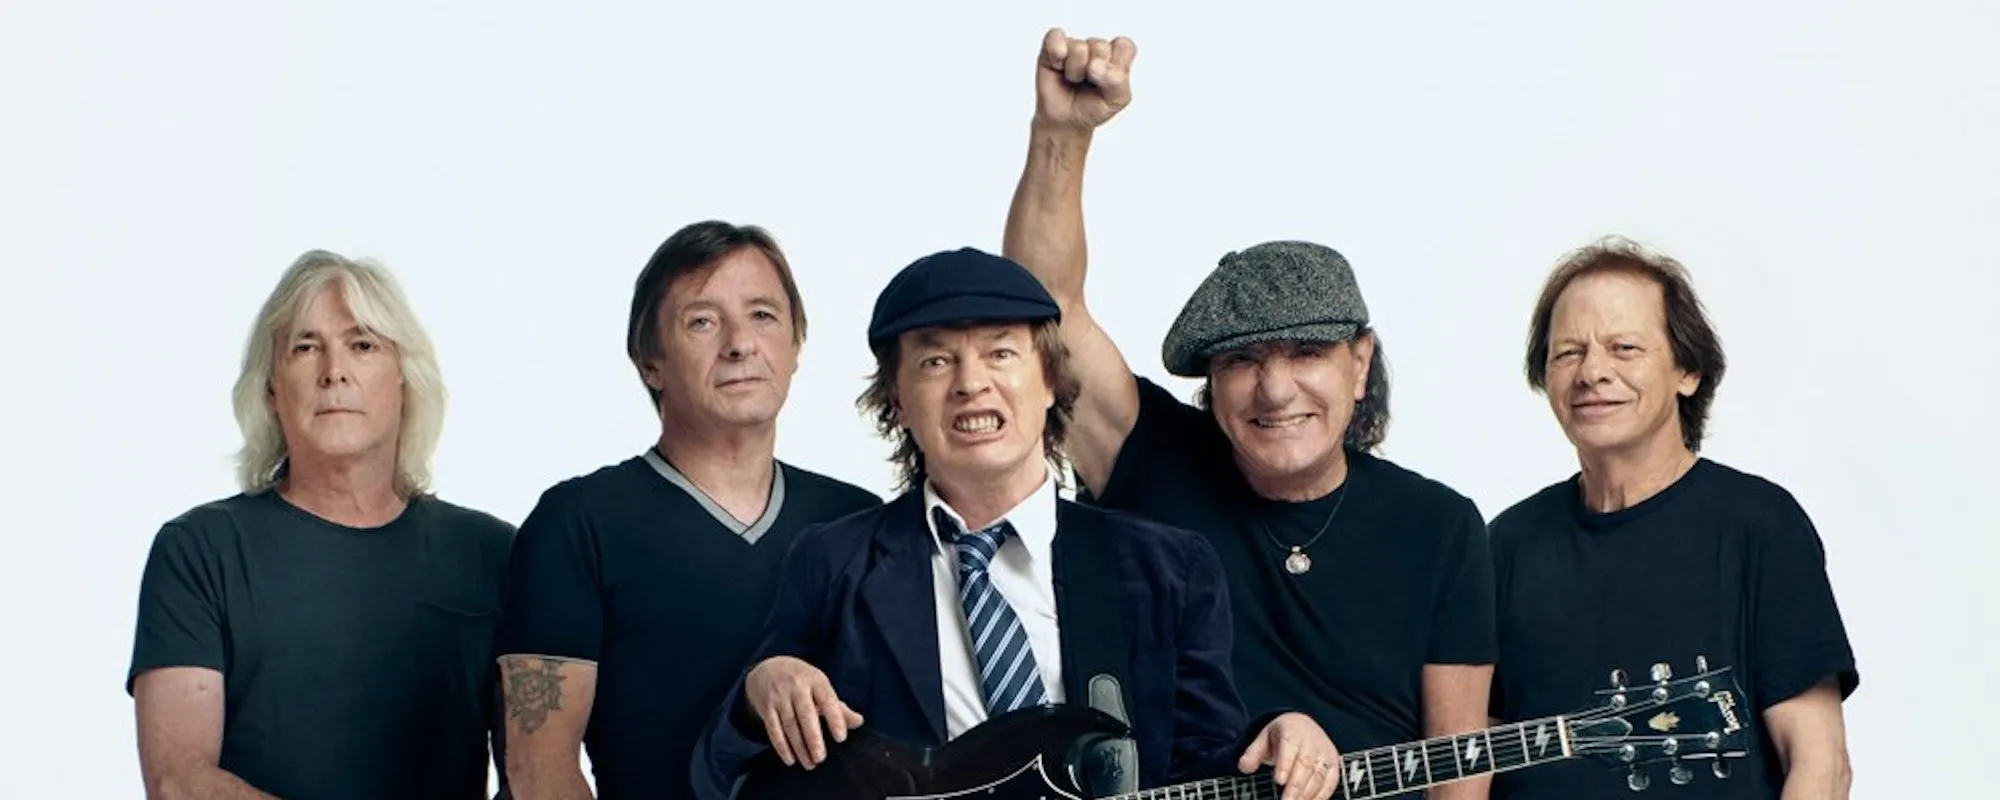 Brian Johnson Open to Work on New Music with AC/DC: “I’d Be Up For It”